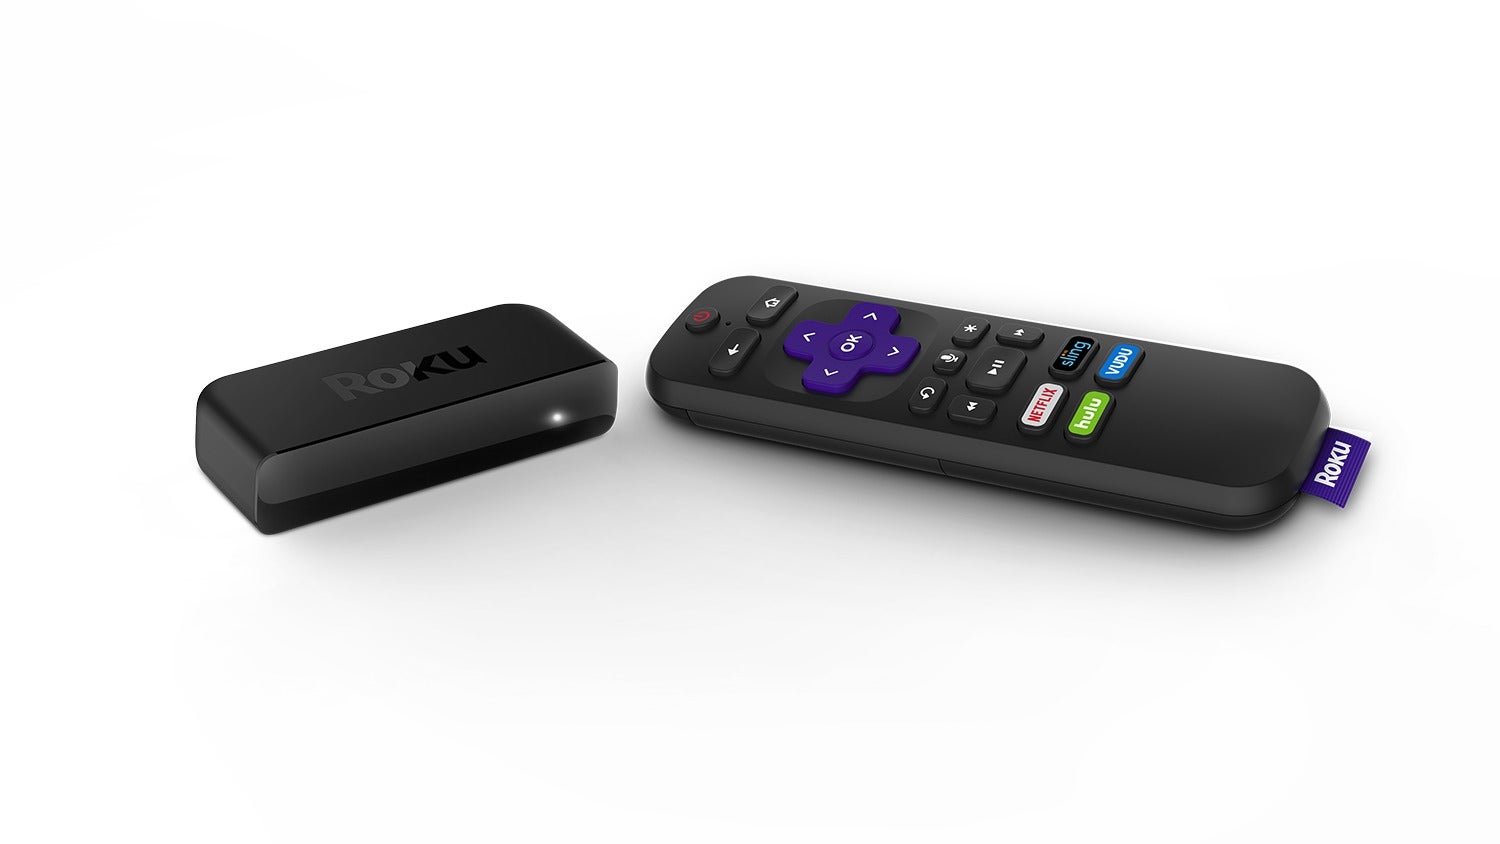 Roku adds low-cost Premiere 4K players to its line up | TechHive